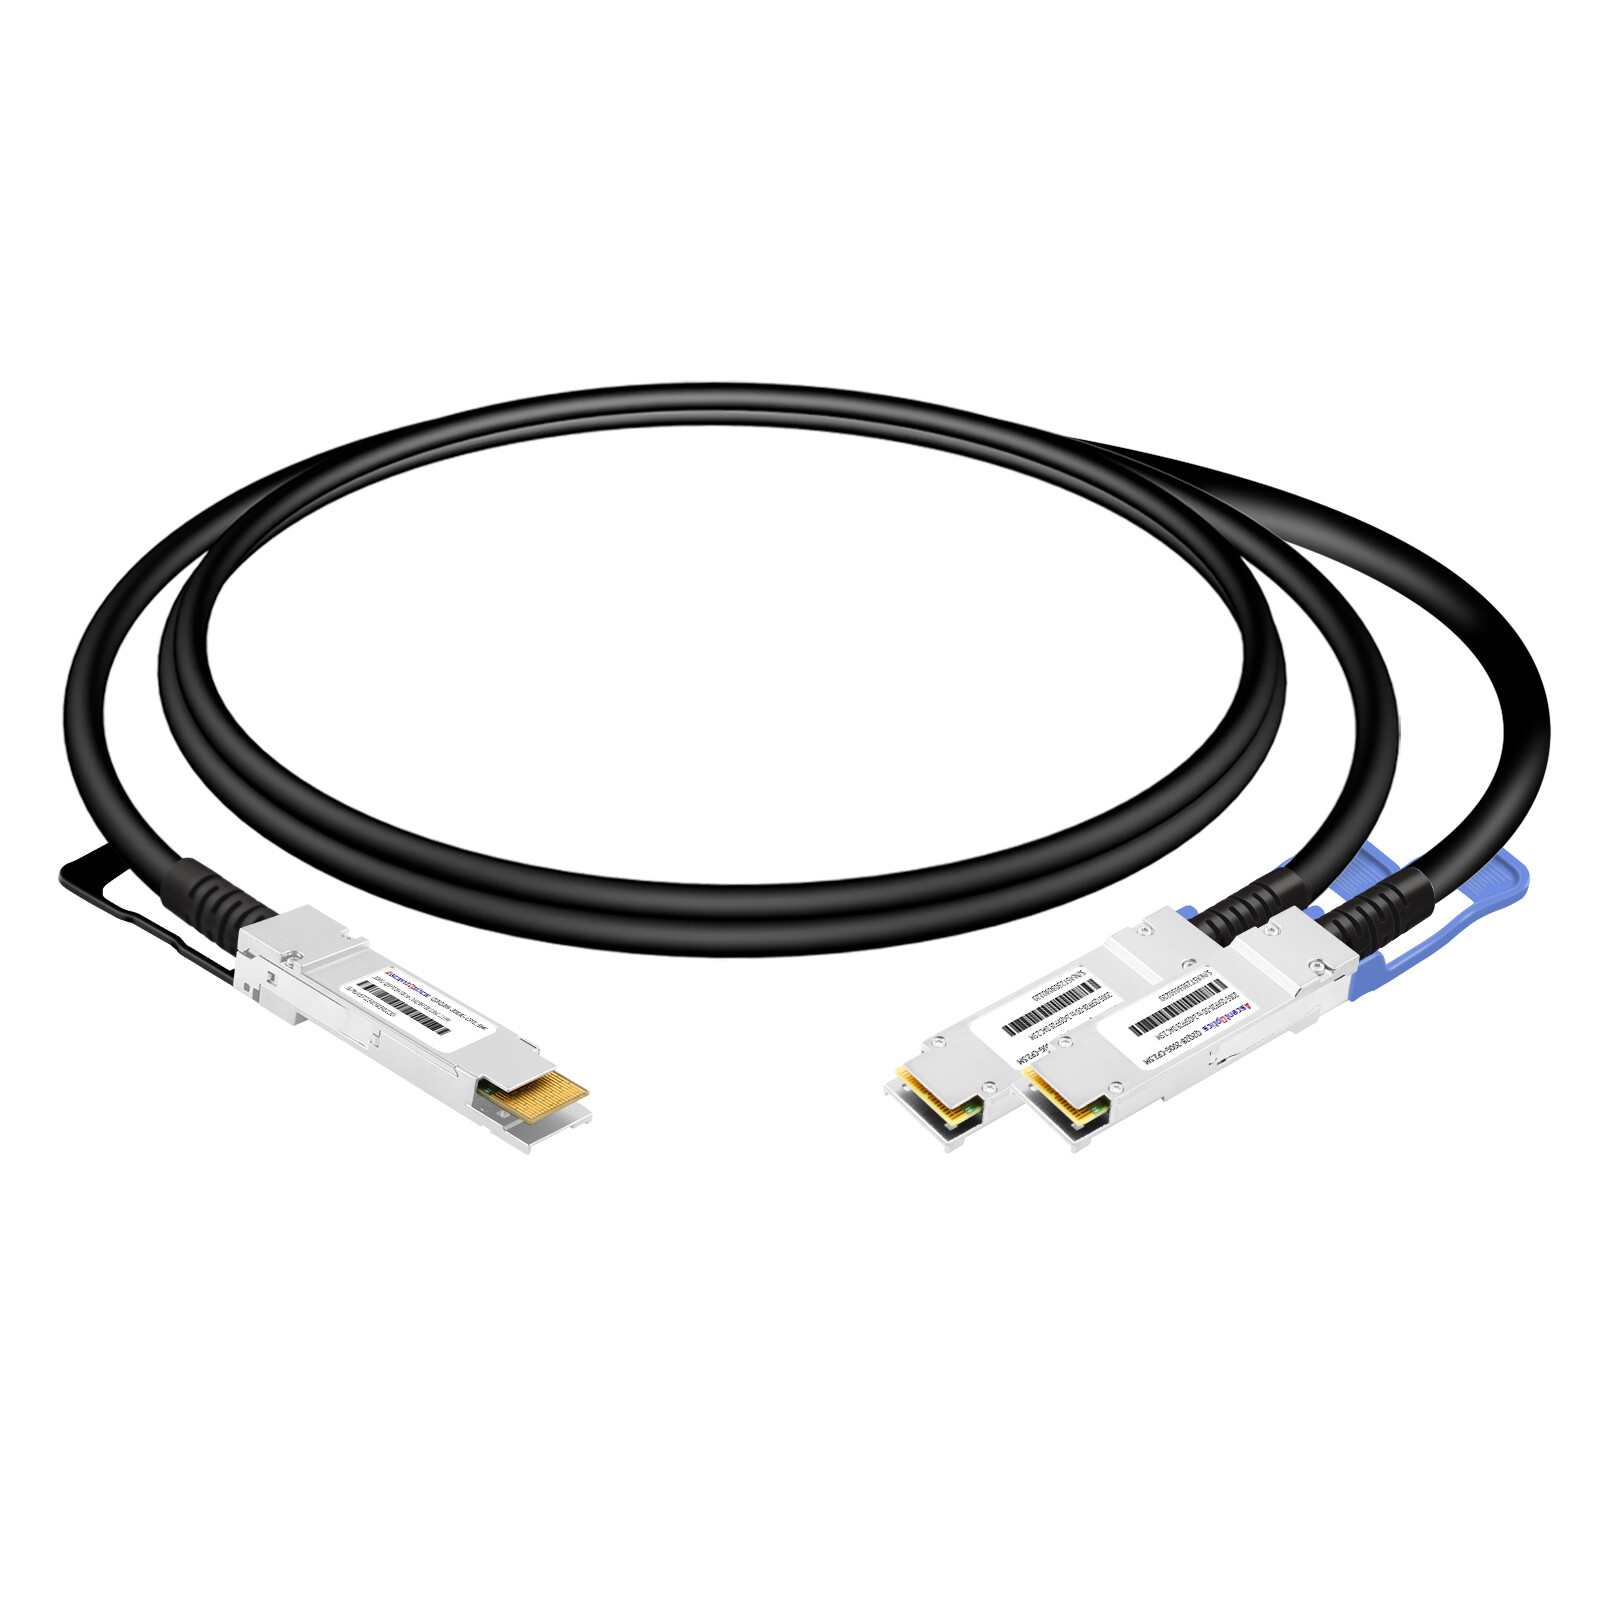 200G QSFP28-DD to 2x 100G QSFP28 Copper Breakout Cable,2.5 Meters,Passive